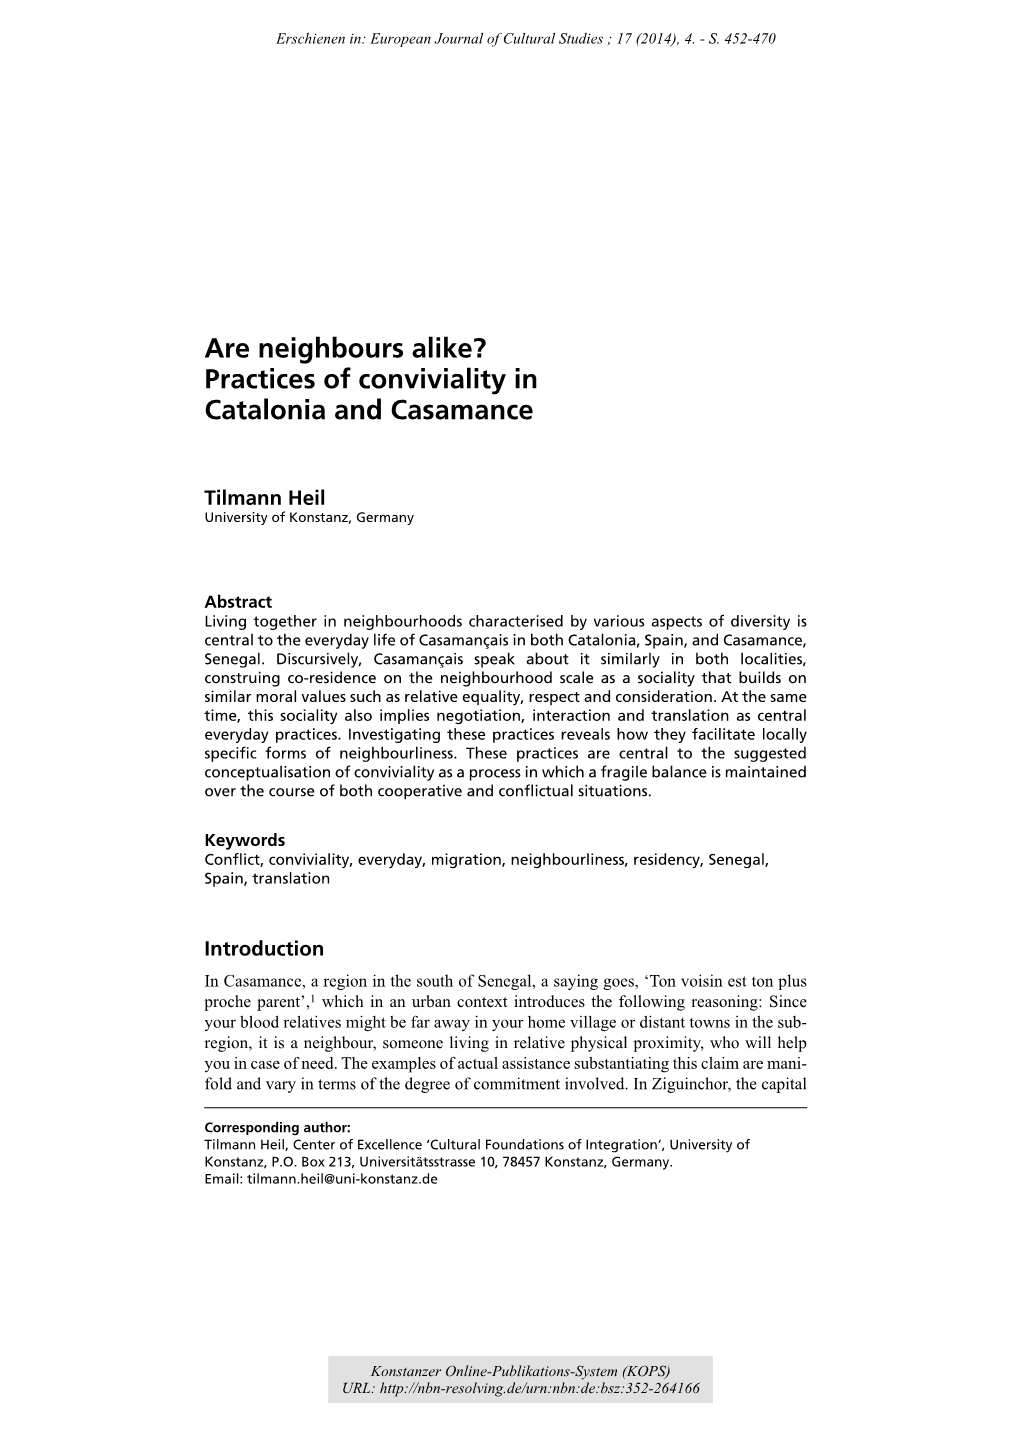 Are Neighbours Alike? : Practices of Conviviality in Catalonia And